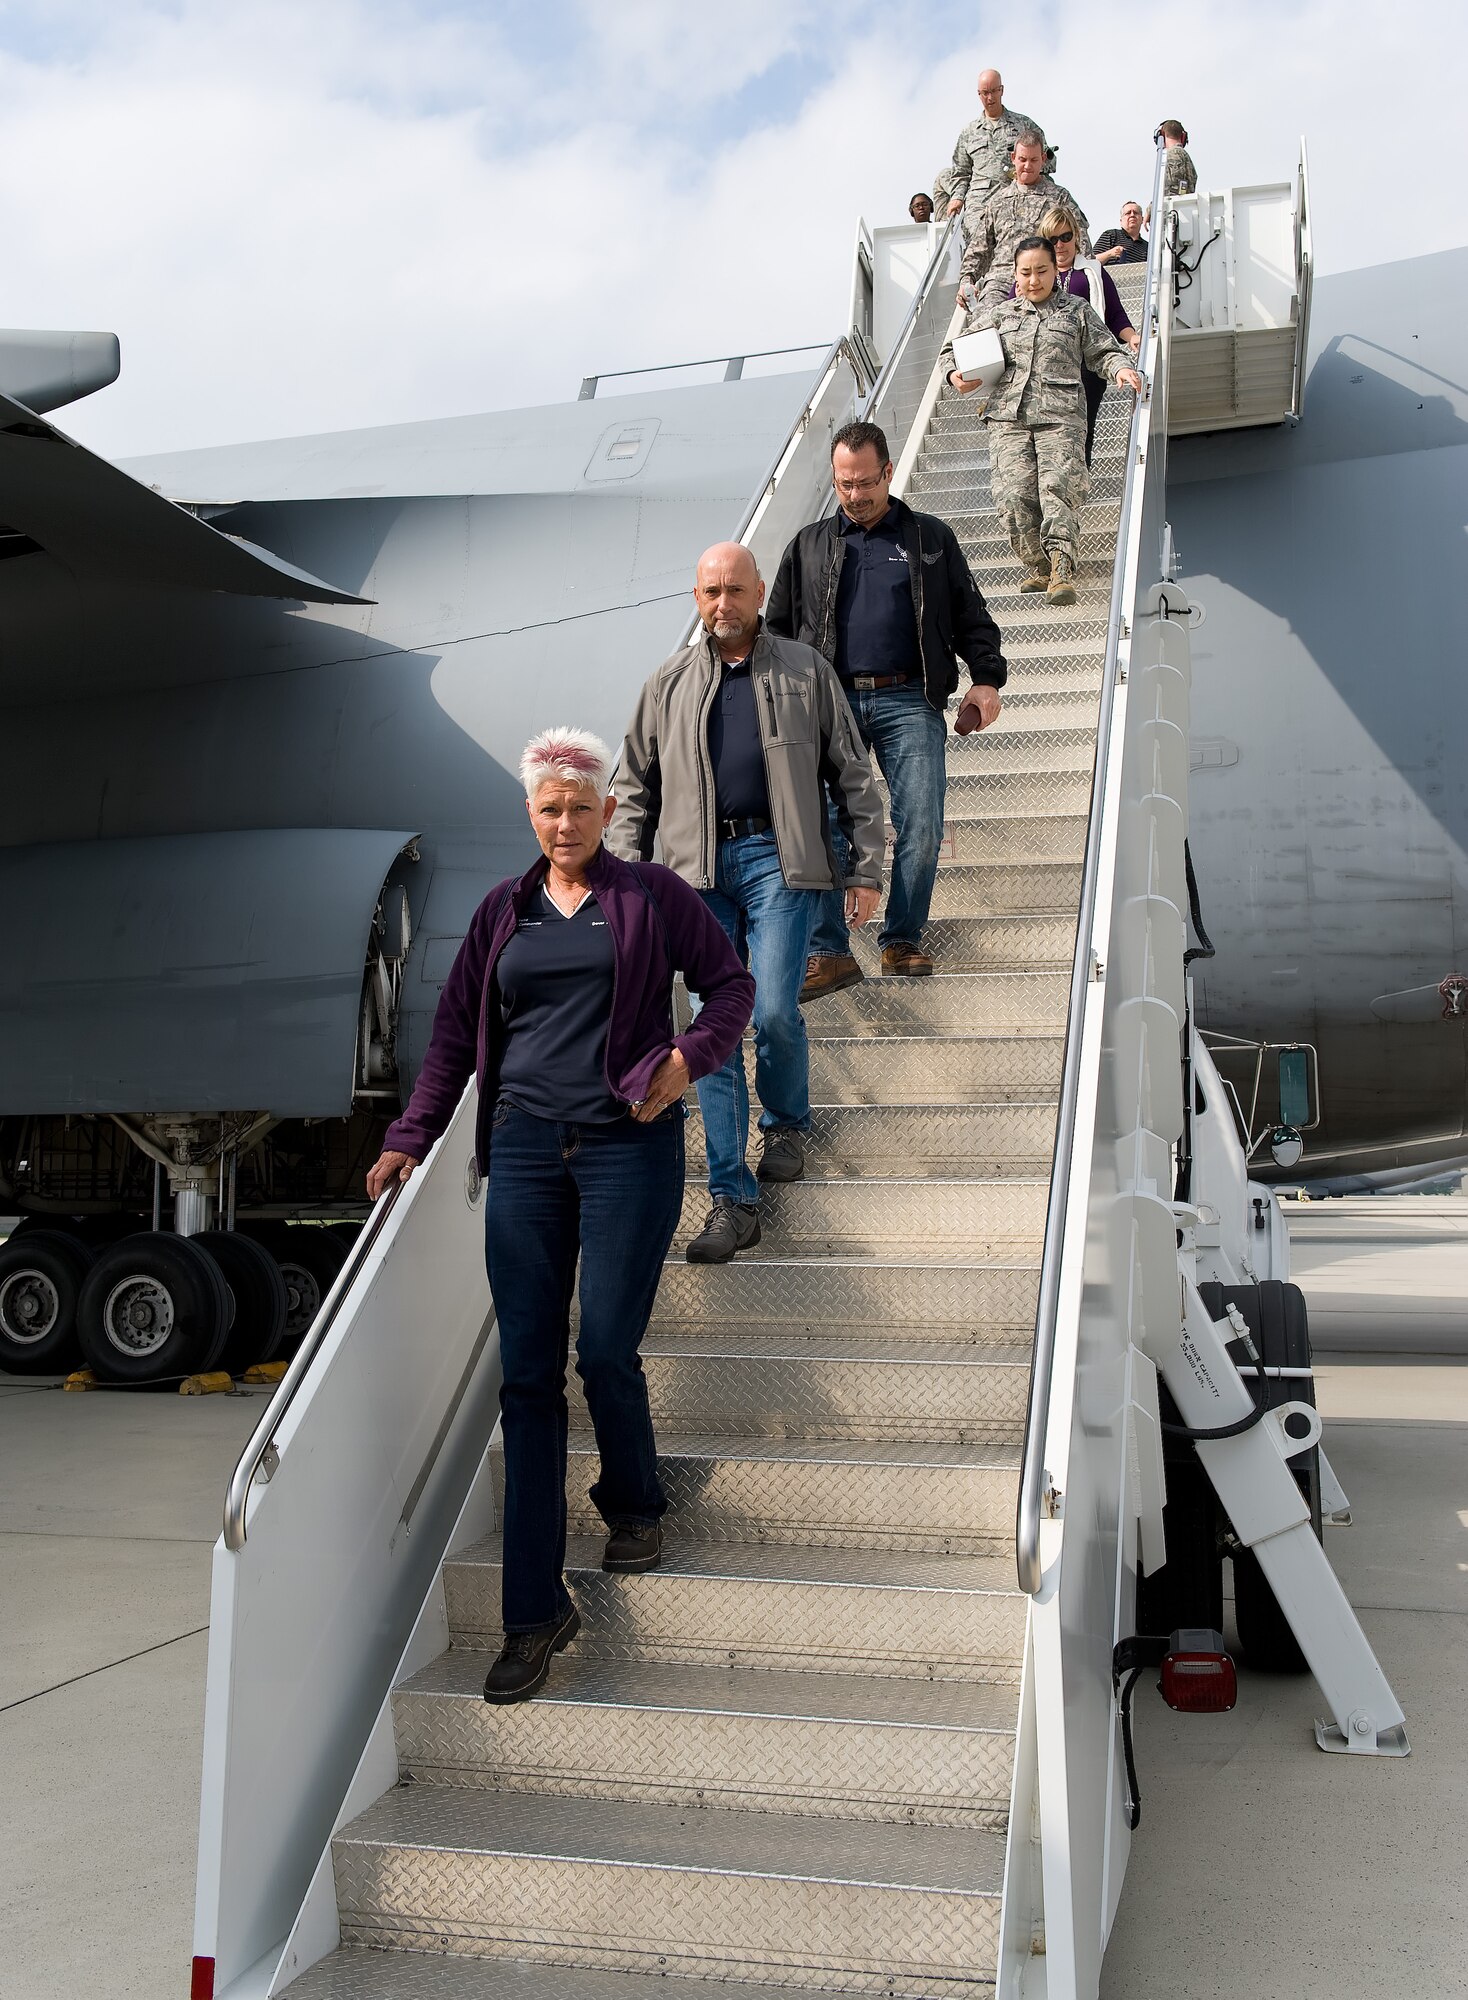 Honorary commanders Dawne Nickerson-Banez, 436th Logistics Readiness Squadron; Tom Banez, 436th Aerial Port Squadron; and John Yoho, 436th Maintenance Group, front to rear respectively, walk down the stairs leading from the troop compartment of a C-5M Super Galaxy  Oct. 29, 2014, at Dover Air Force Base, Del. Seventeen Team Dover honorary commanders went on a 2.7 hour flight that included air refueling with two Pennsylvania Air National Guard KC-135T Stratotankers from the 171st Air Refueling Wing, Pittsburgh International Airport, Pa. (U.S. Air Force photo/Roland Balik)